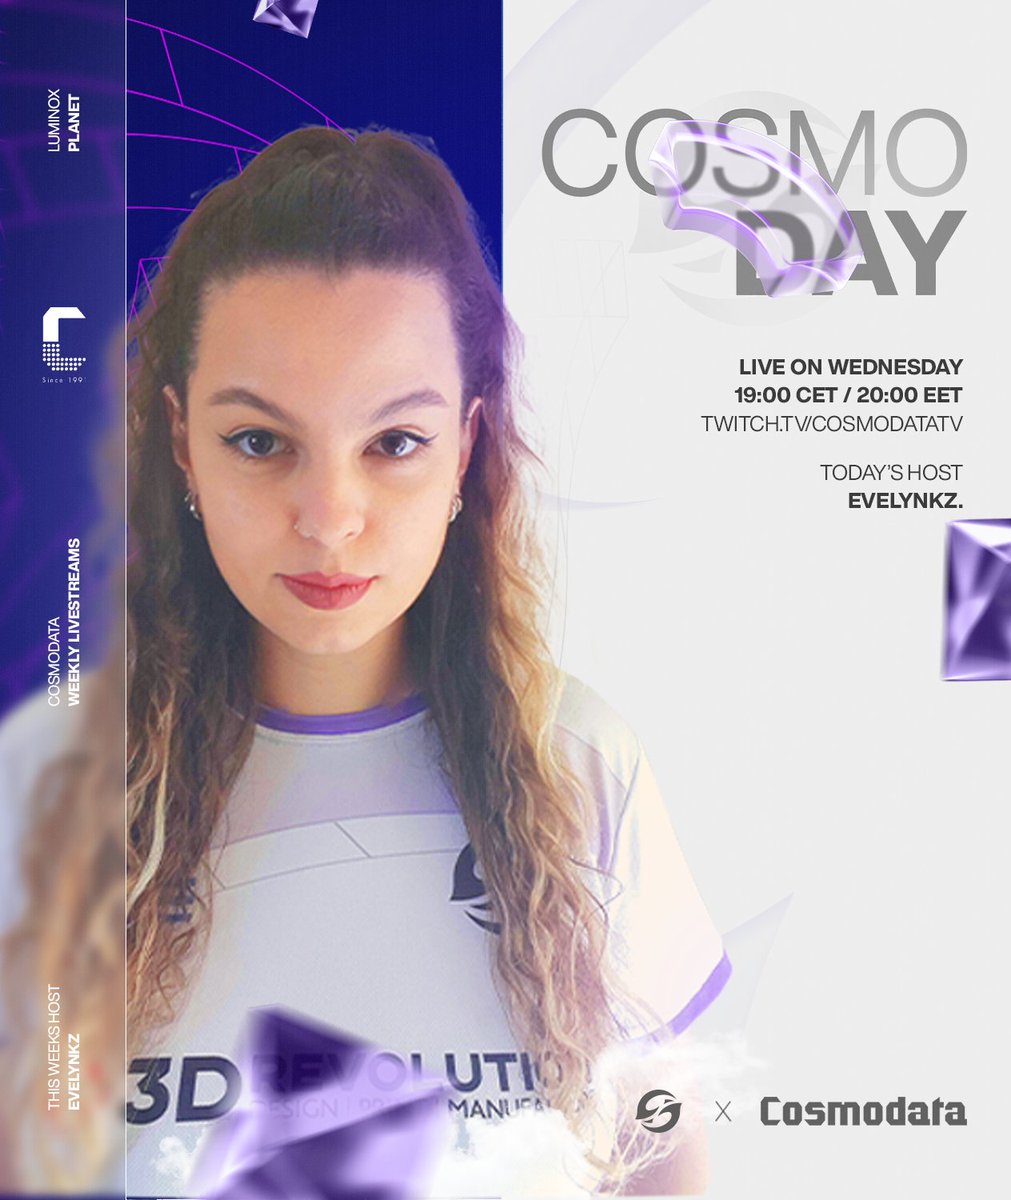 live again with your favorite streamer @evelynkz_ 👀 📺- twitch.tv/cosmodatatv @cosmodata